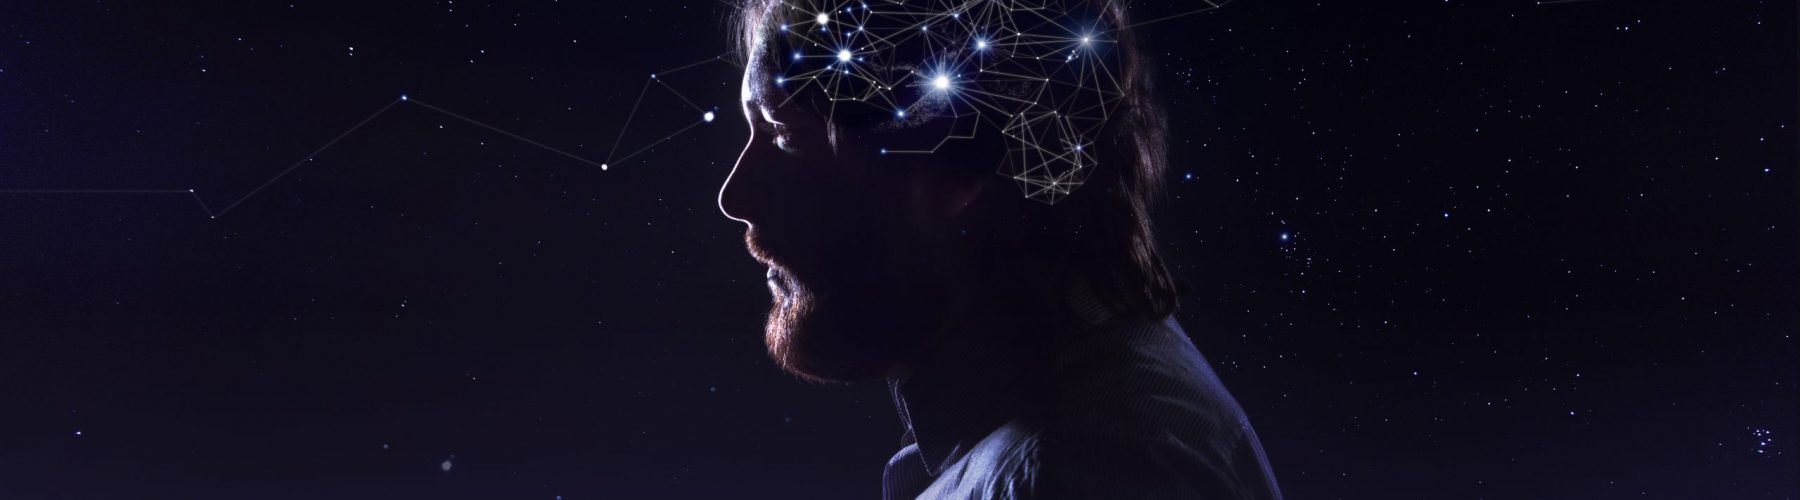 Profile of a bearded man head with a symbol of neurons in the brain